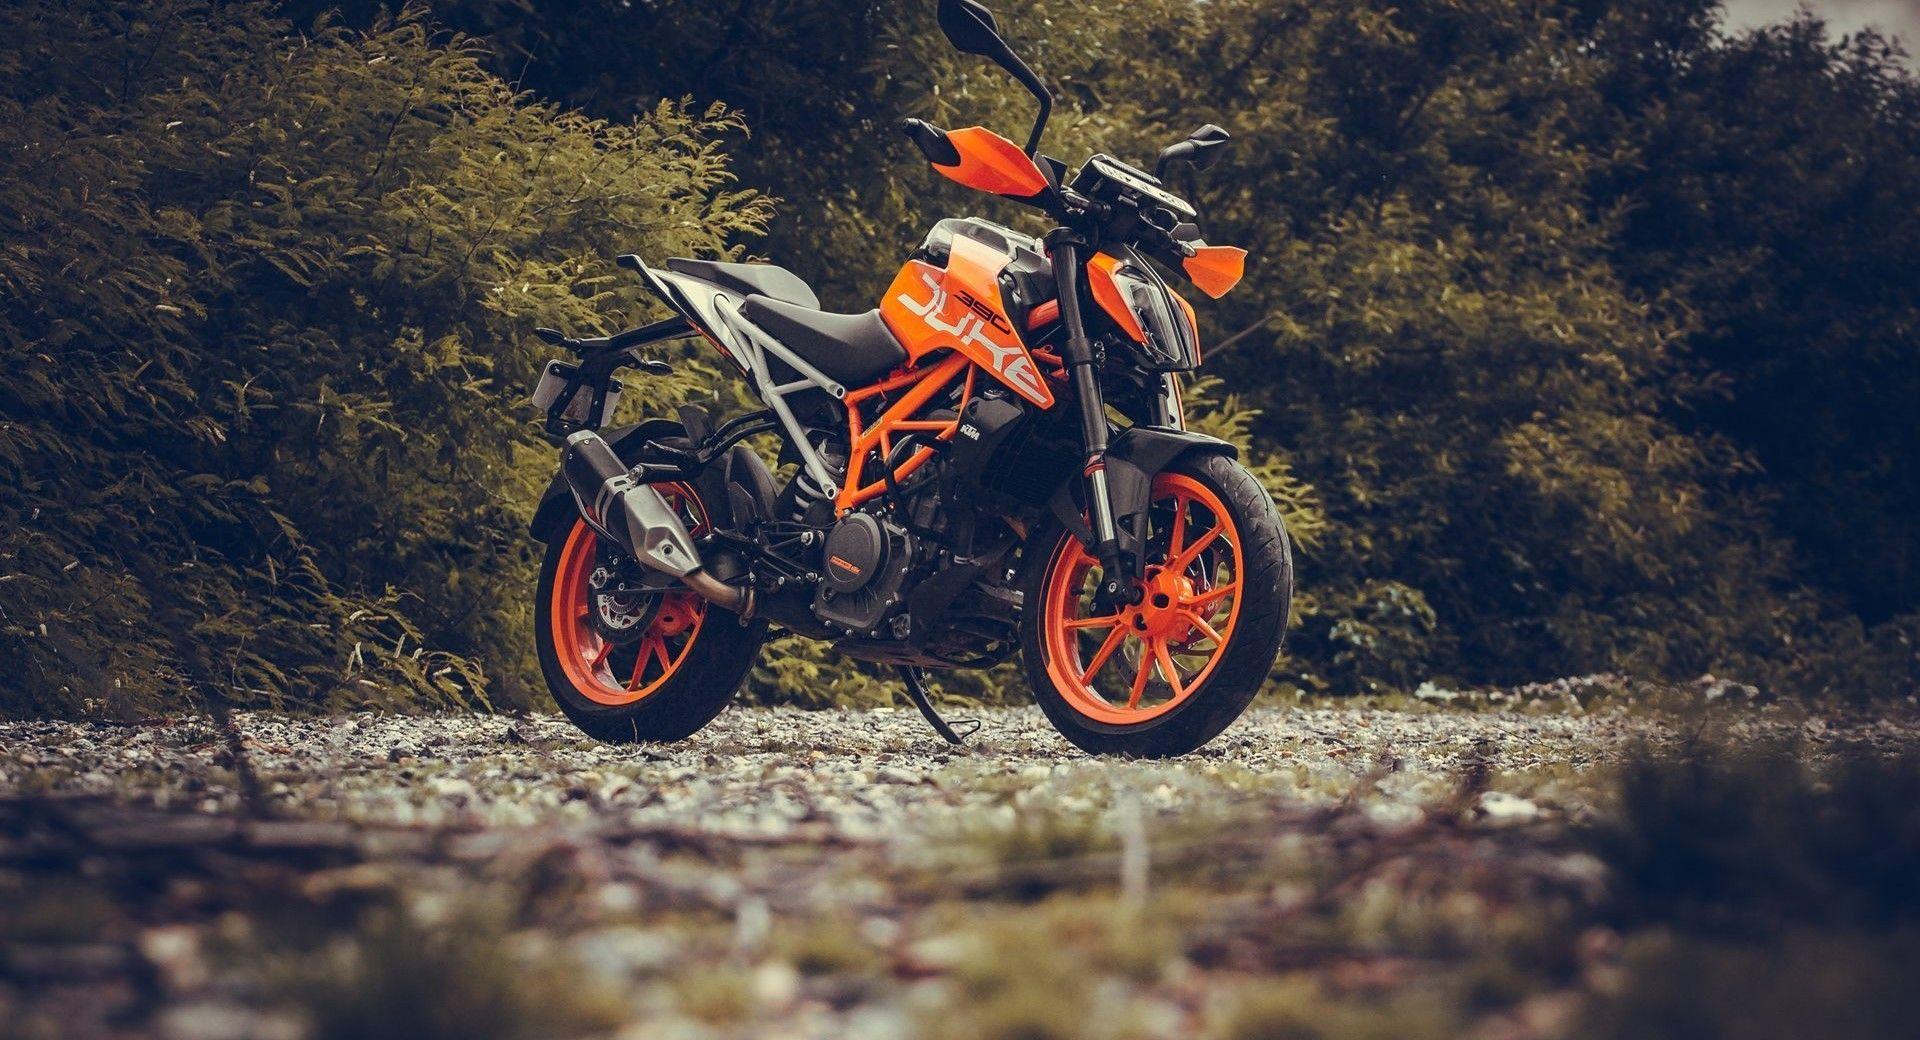 Lates KTM Bikes HD Wallpaper Picture and Image Download